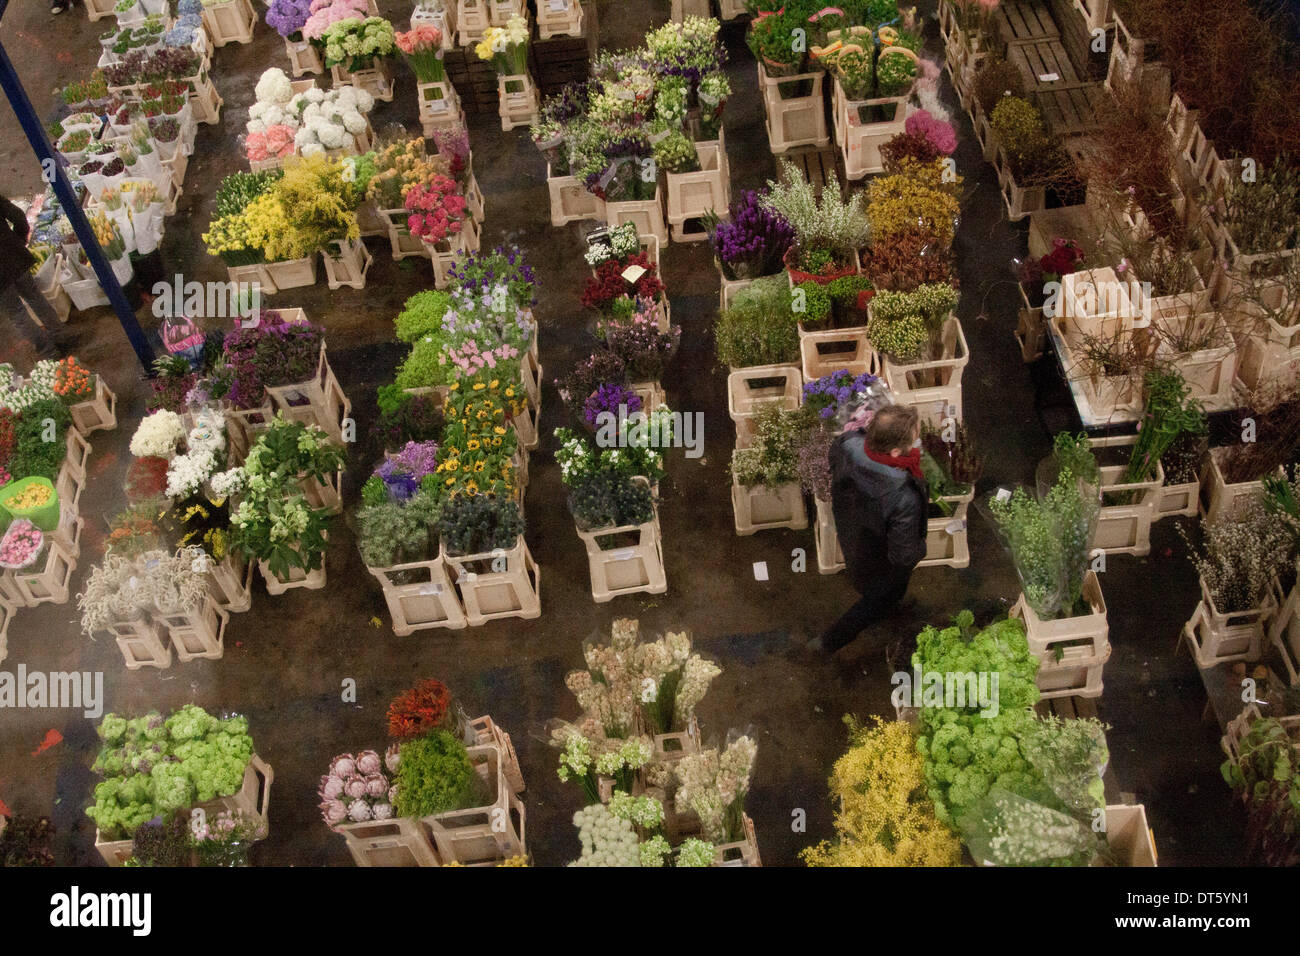 London UK. 10th February 2014. Wholesale market vendors sell flowers in New Covent Garden Flower Market stocking a wide range of flowers and plants in the week  running up to St Valentines Day. The British people  spend  more than 50 million pounds on flowers for Valentines Credit:  amer ghazzal/Alamy Live News Stock Photo